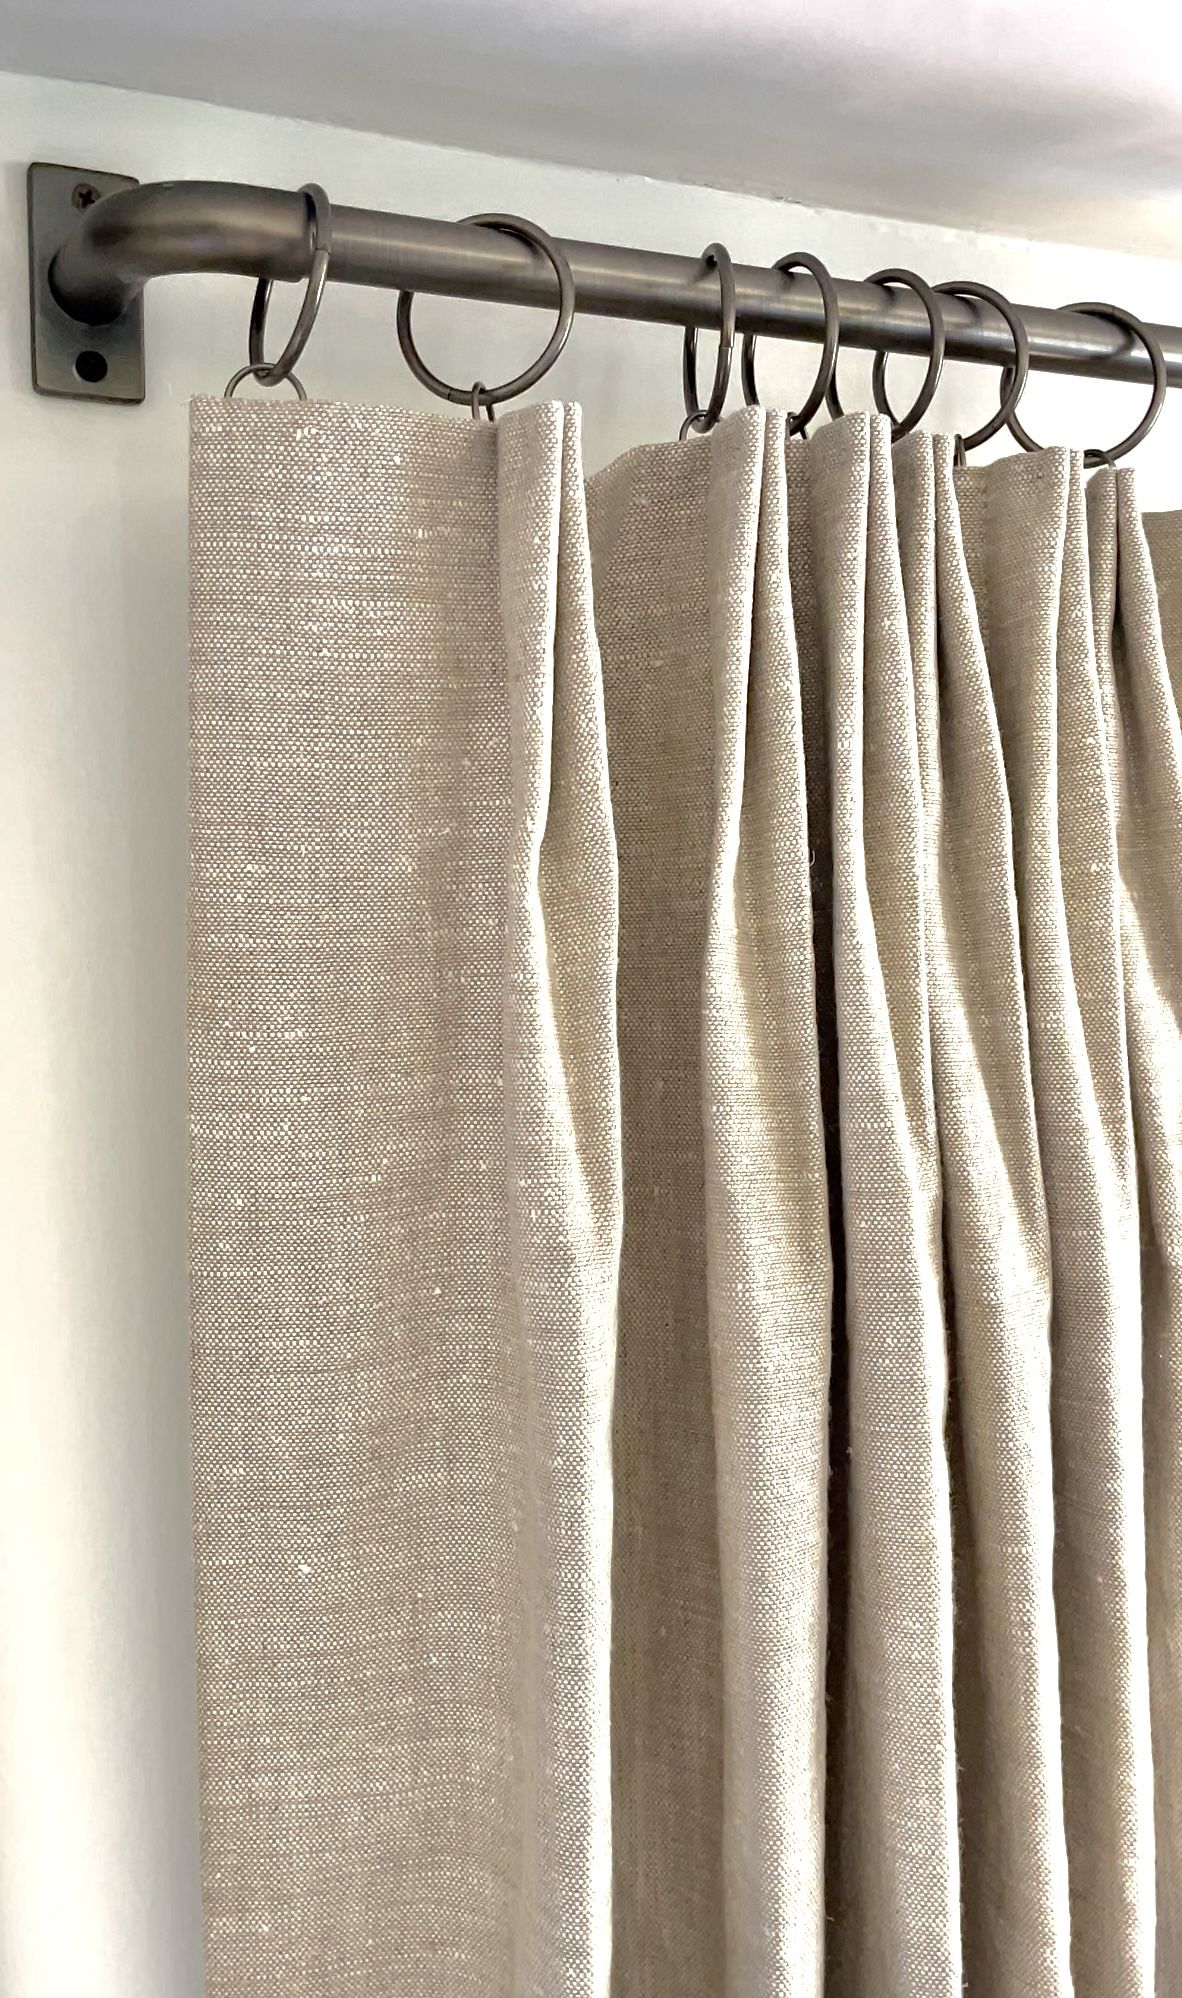 Designer Curtains: Elevate Your Home Decor with Luxurious Drapery